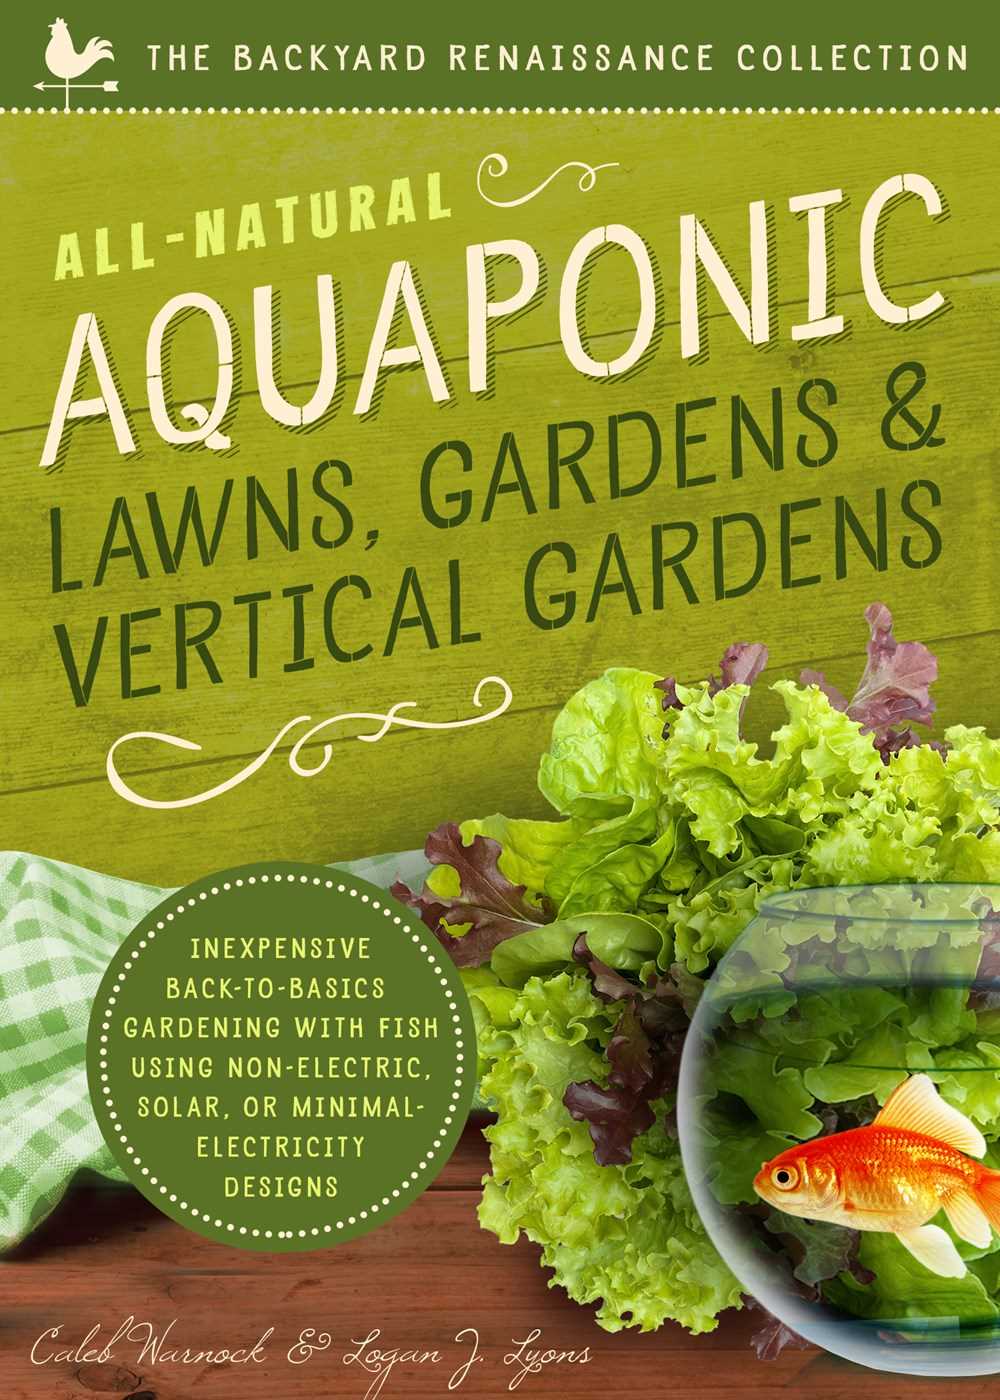 All-Natural Aquaponic Lawns, Gardens & Vertical Gardens